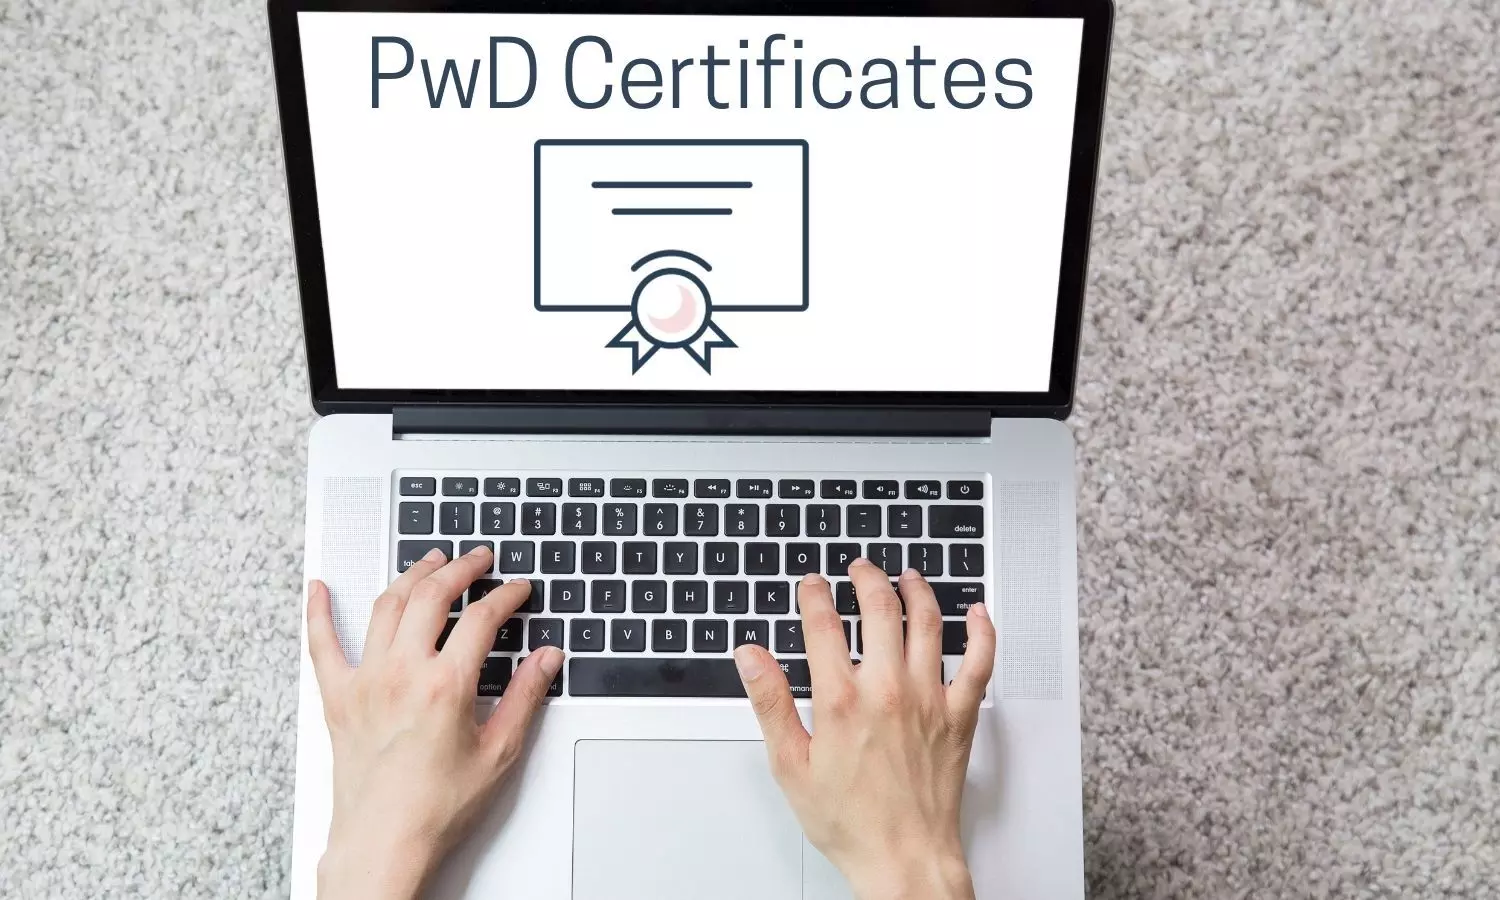 PwD Certificates to be issued Online: MCC